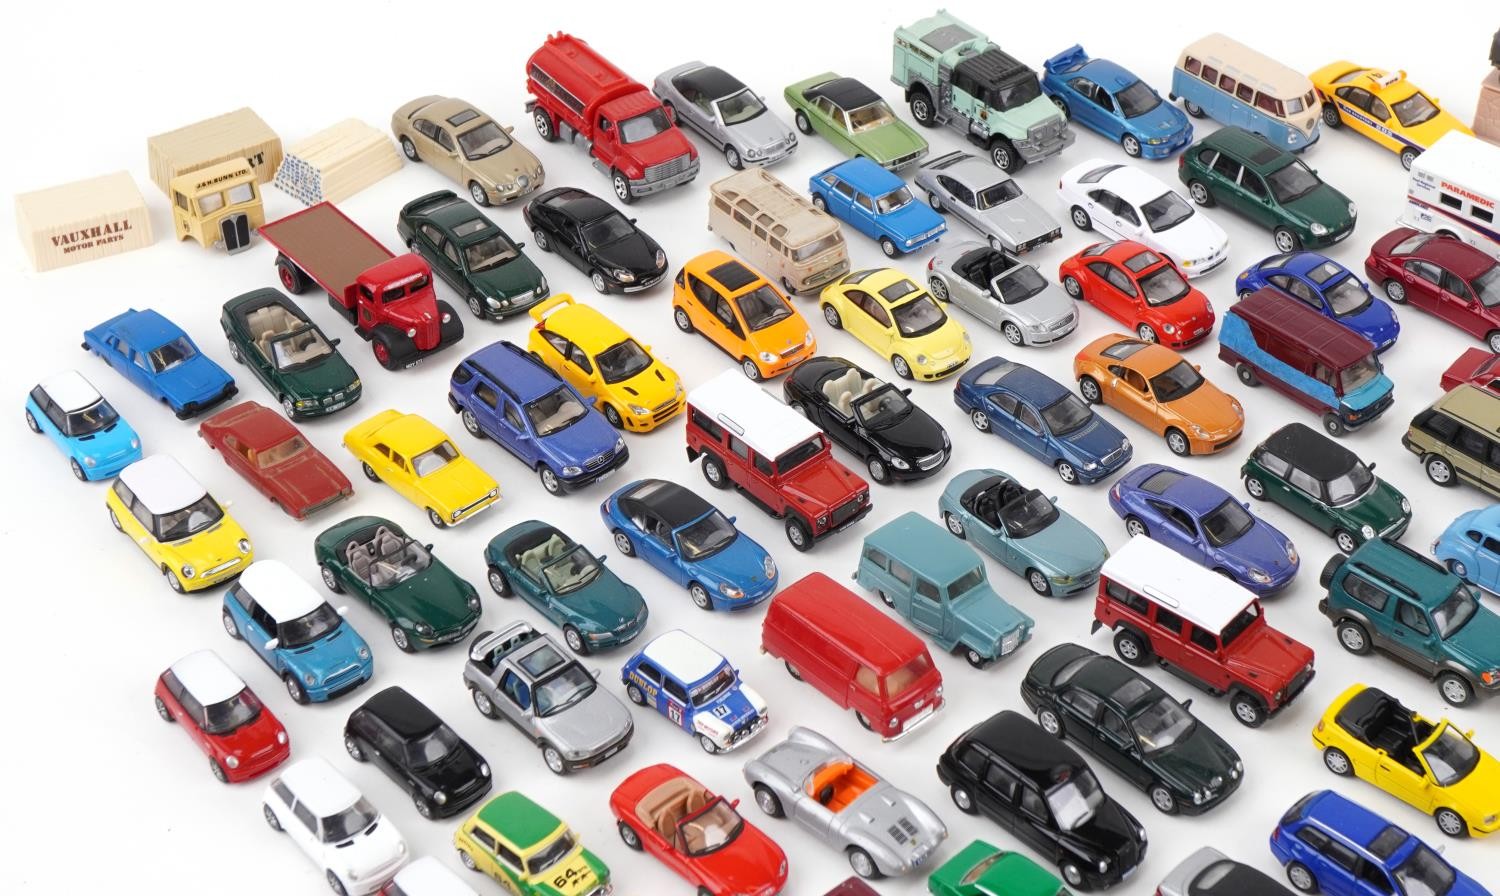 Large collection of vintage and later diecast vehicles including Corgi, Matchbox and Hot Wheels - Image 2 of 5